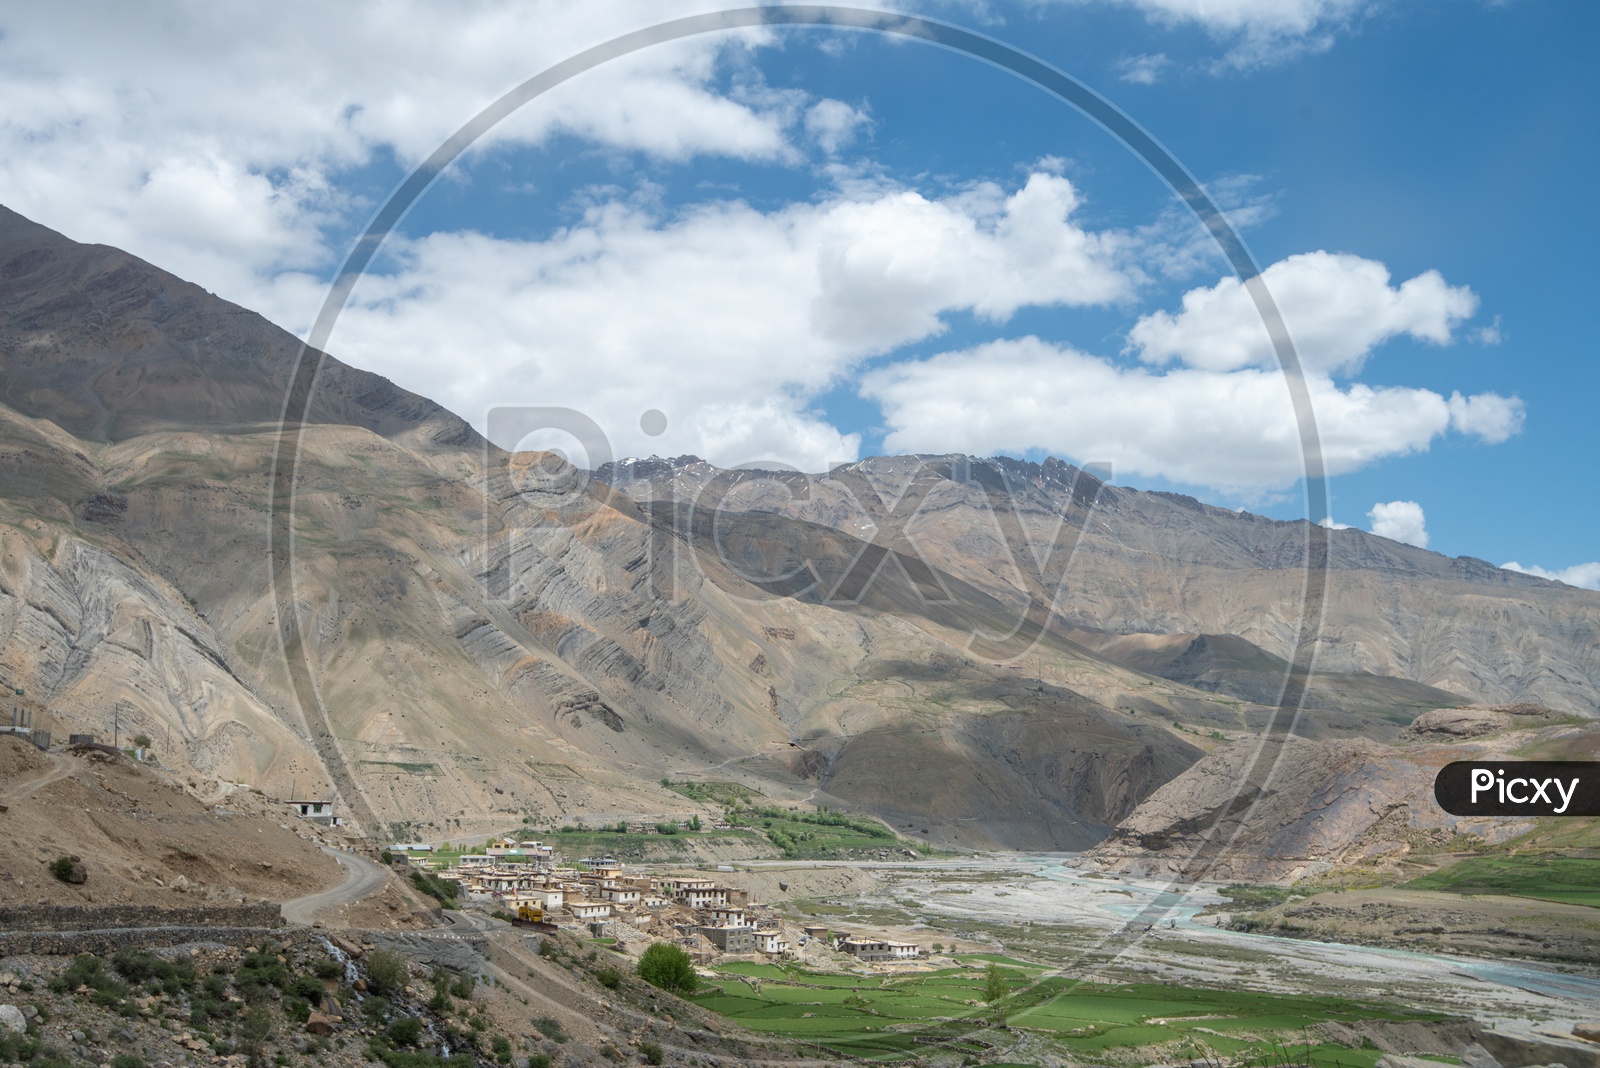 Agricultural farm lands and houses beside Spiti river with mountains in the background in Spiti Valley